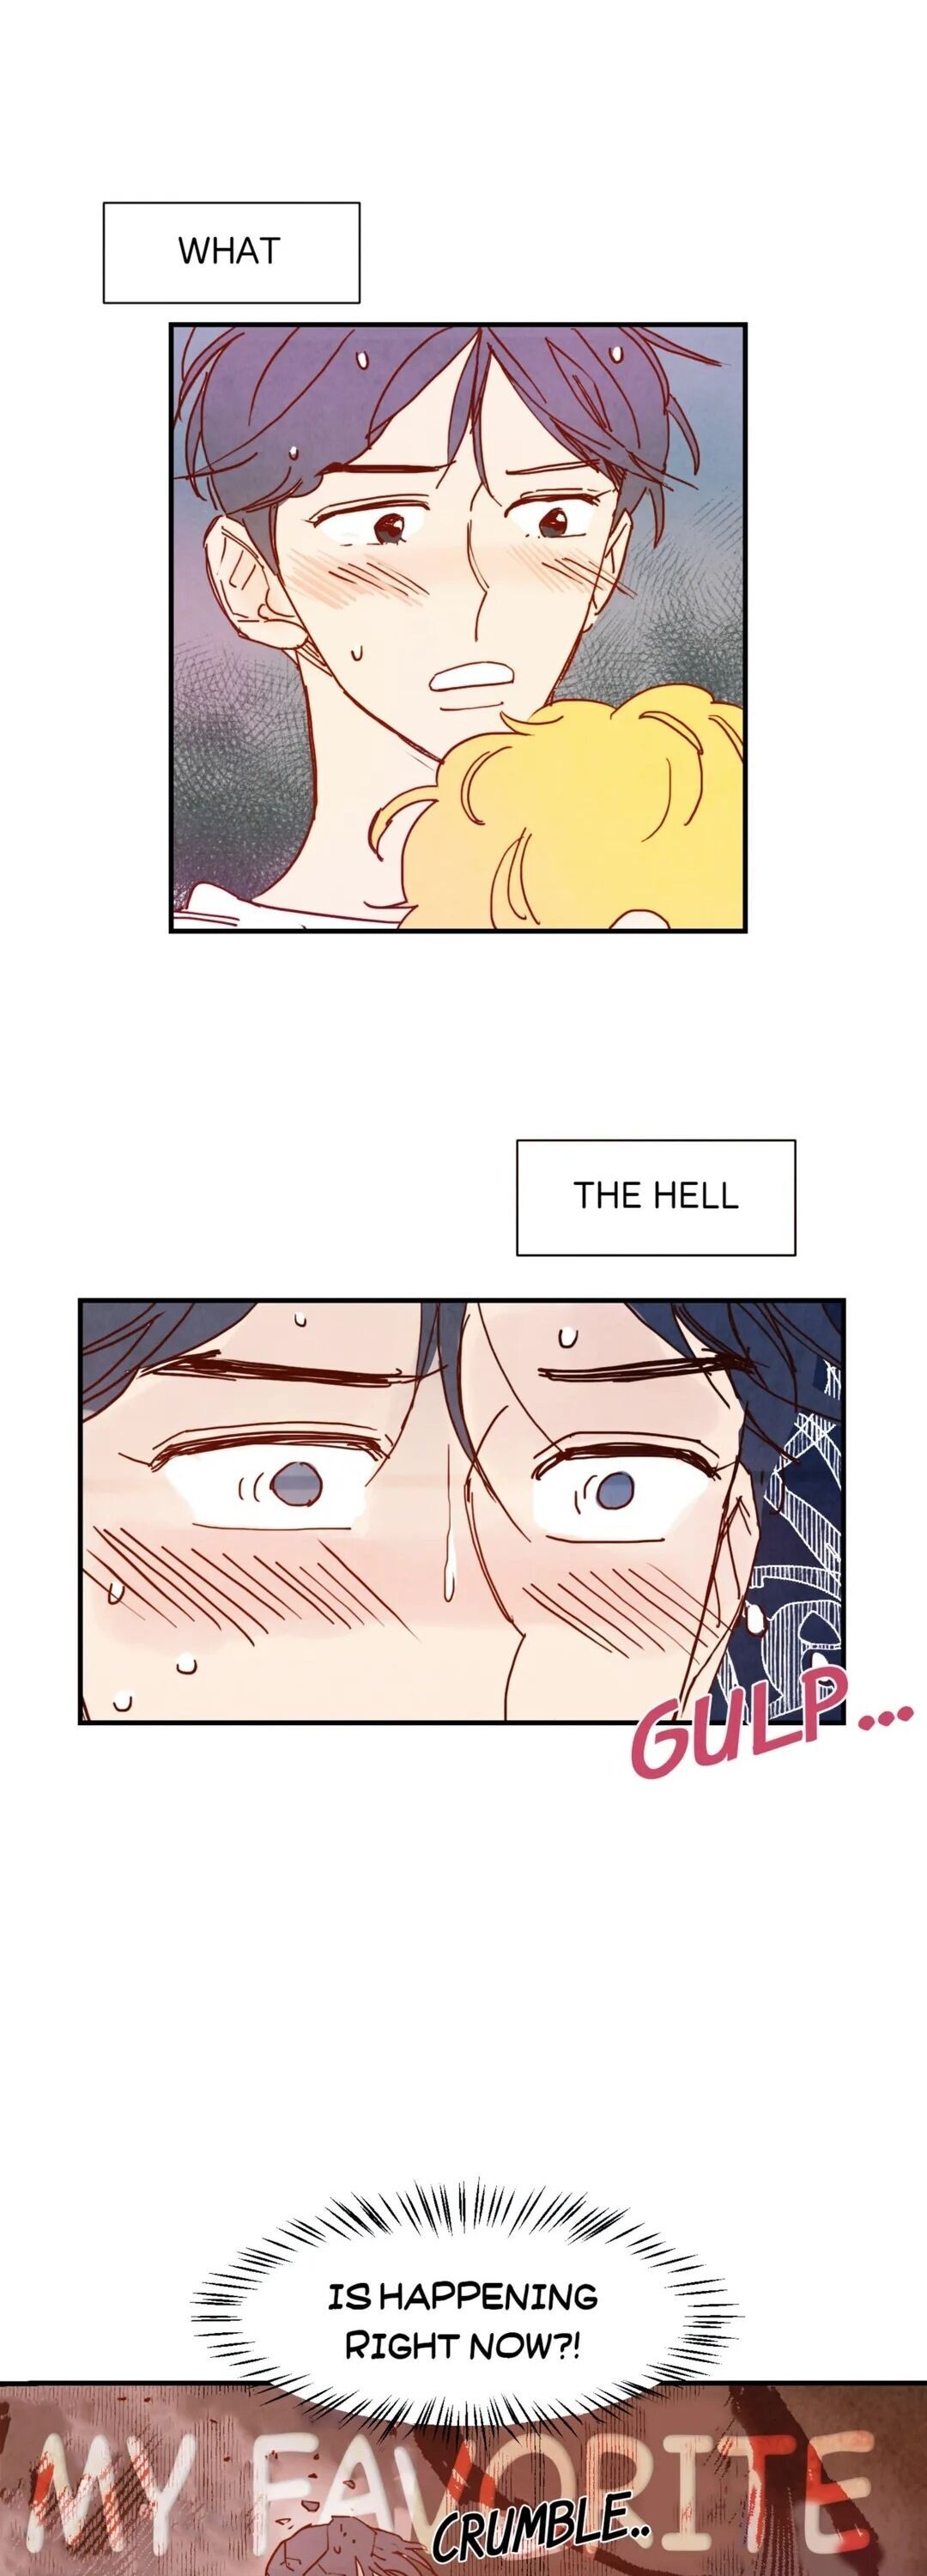 Miss You, Lucifer - Page 2